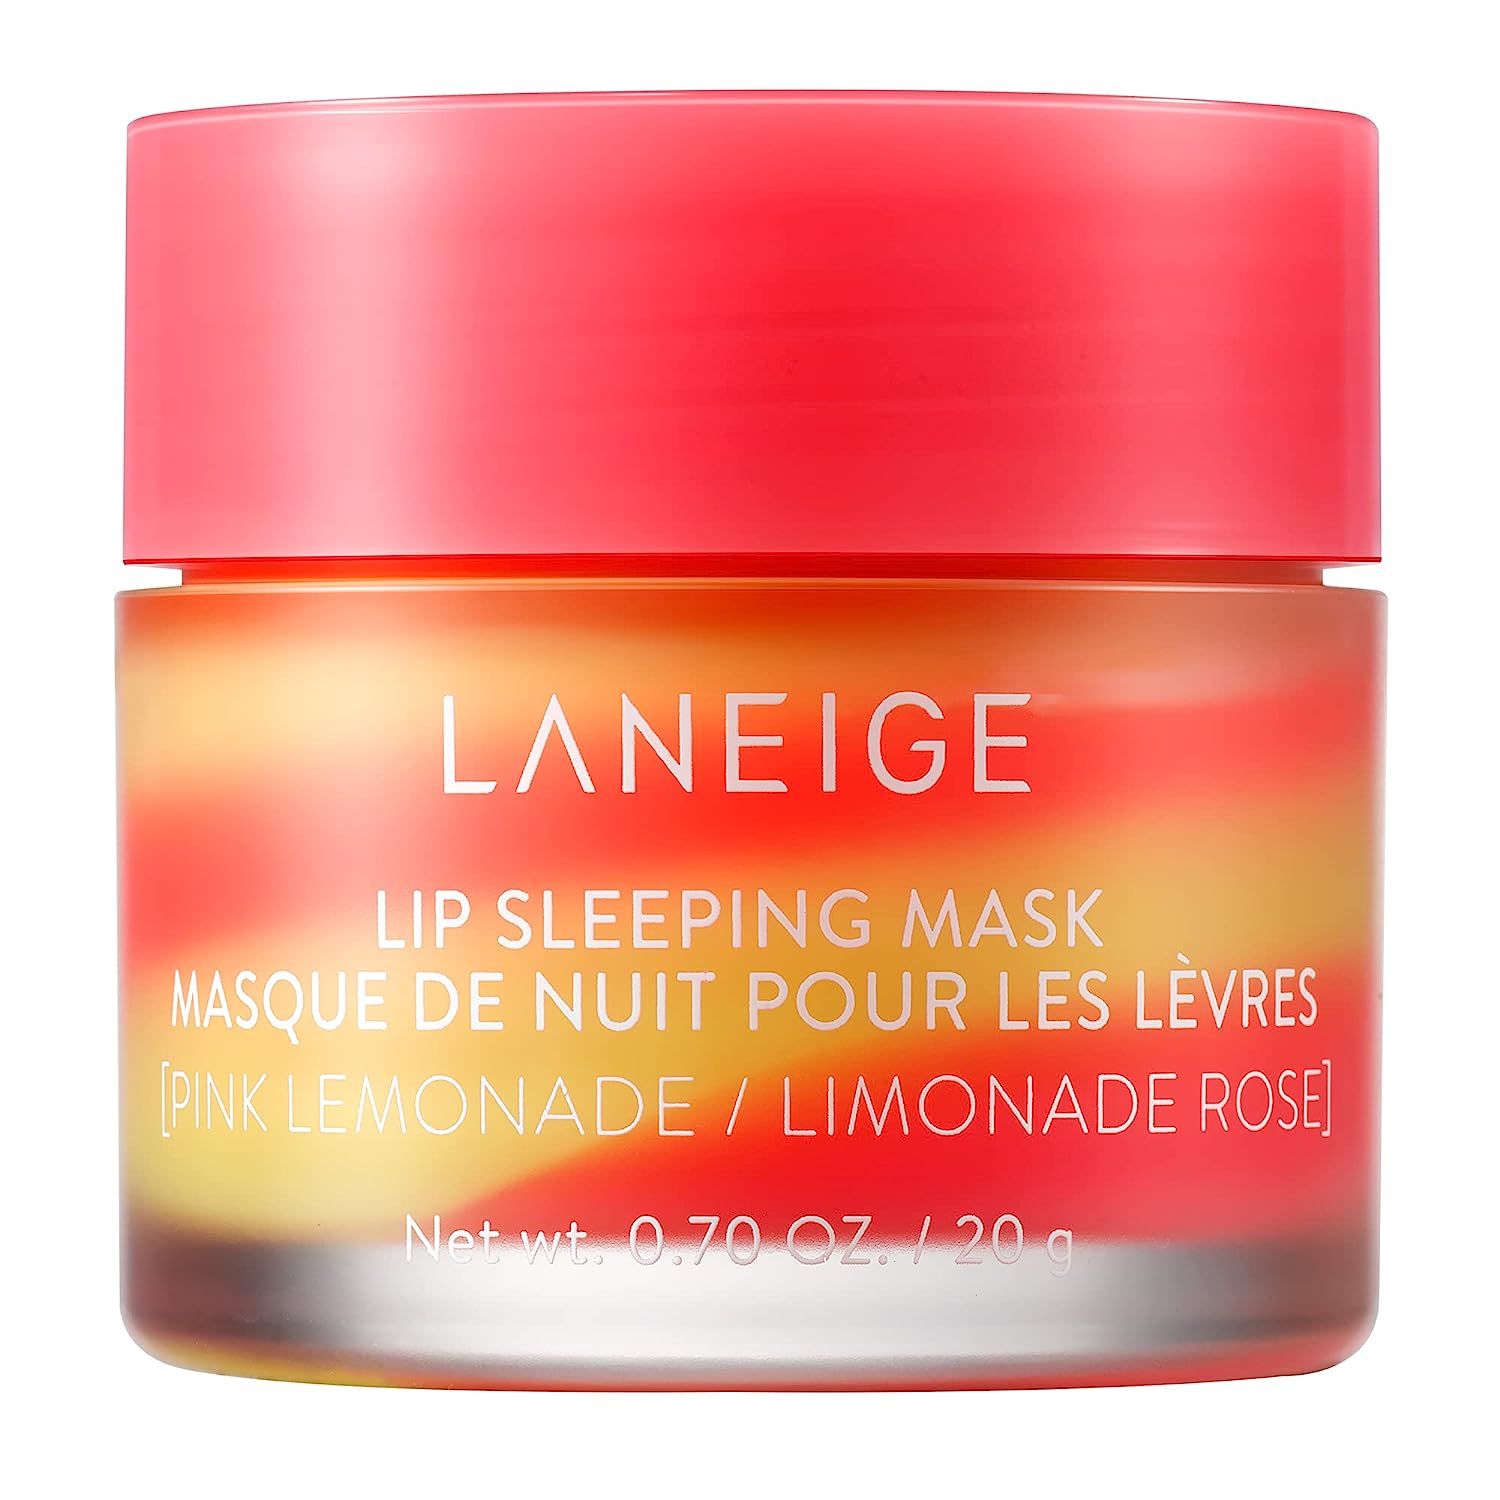 20-facts-about-laneige